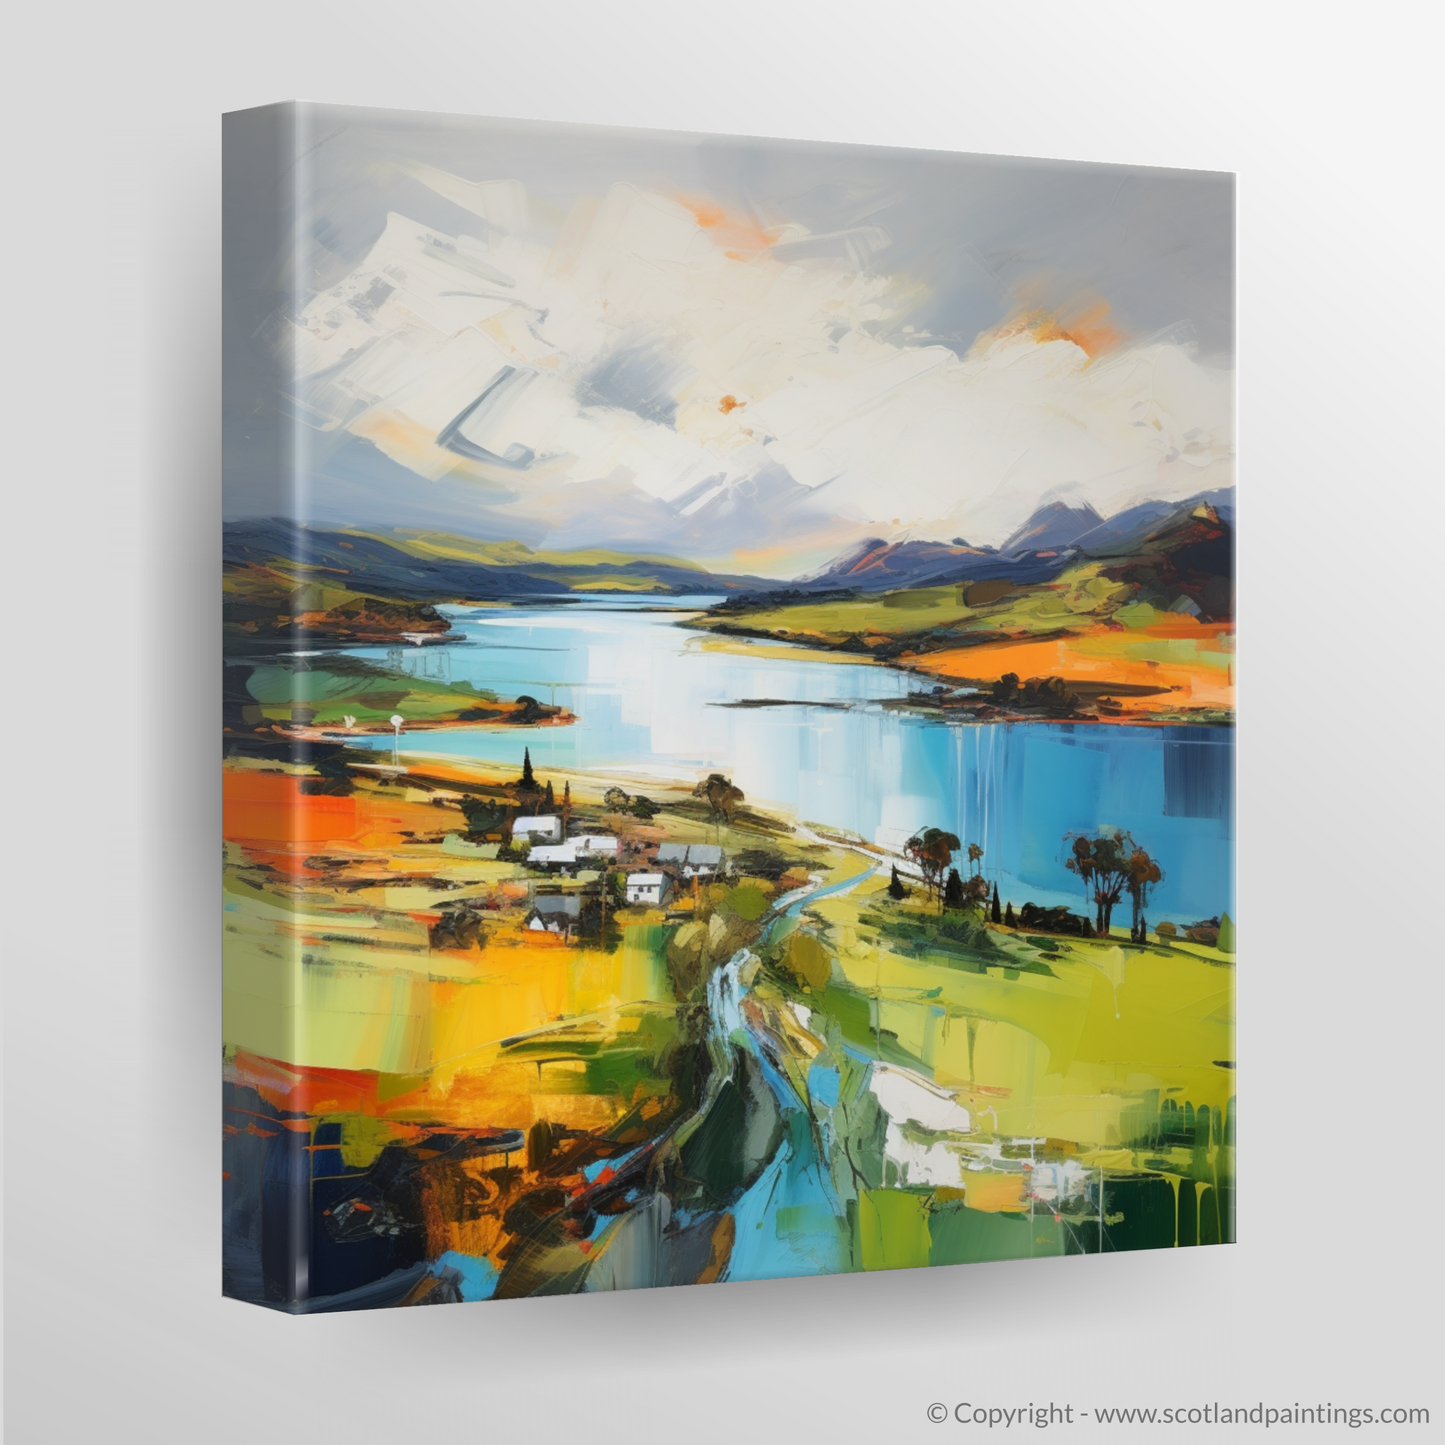 Canvas Print of Loch Leven, Perth and Kinross